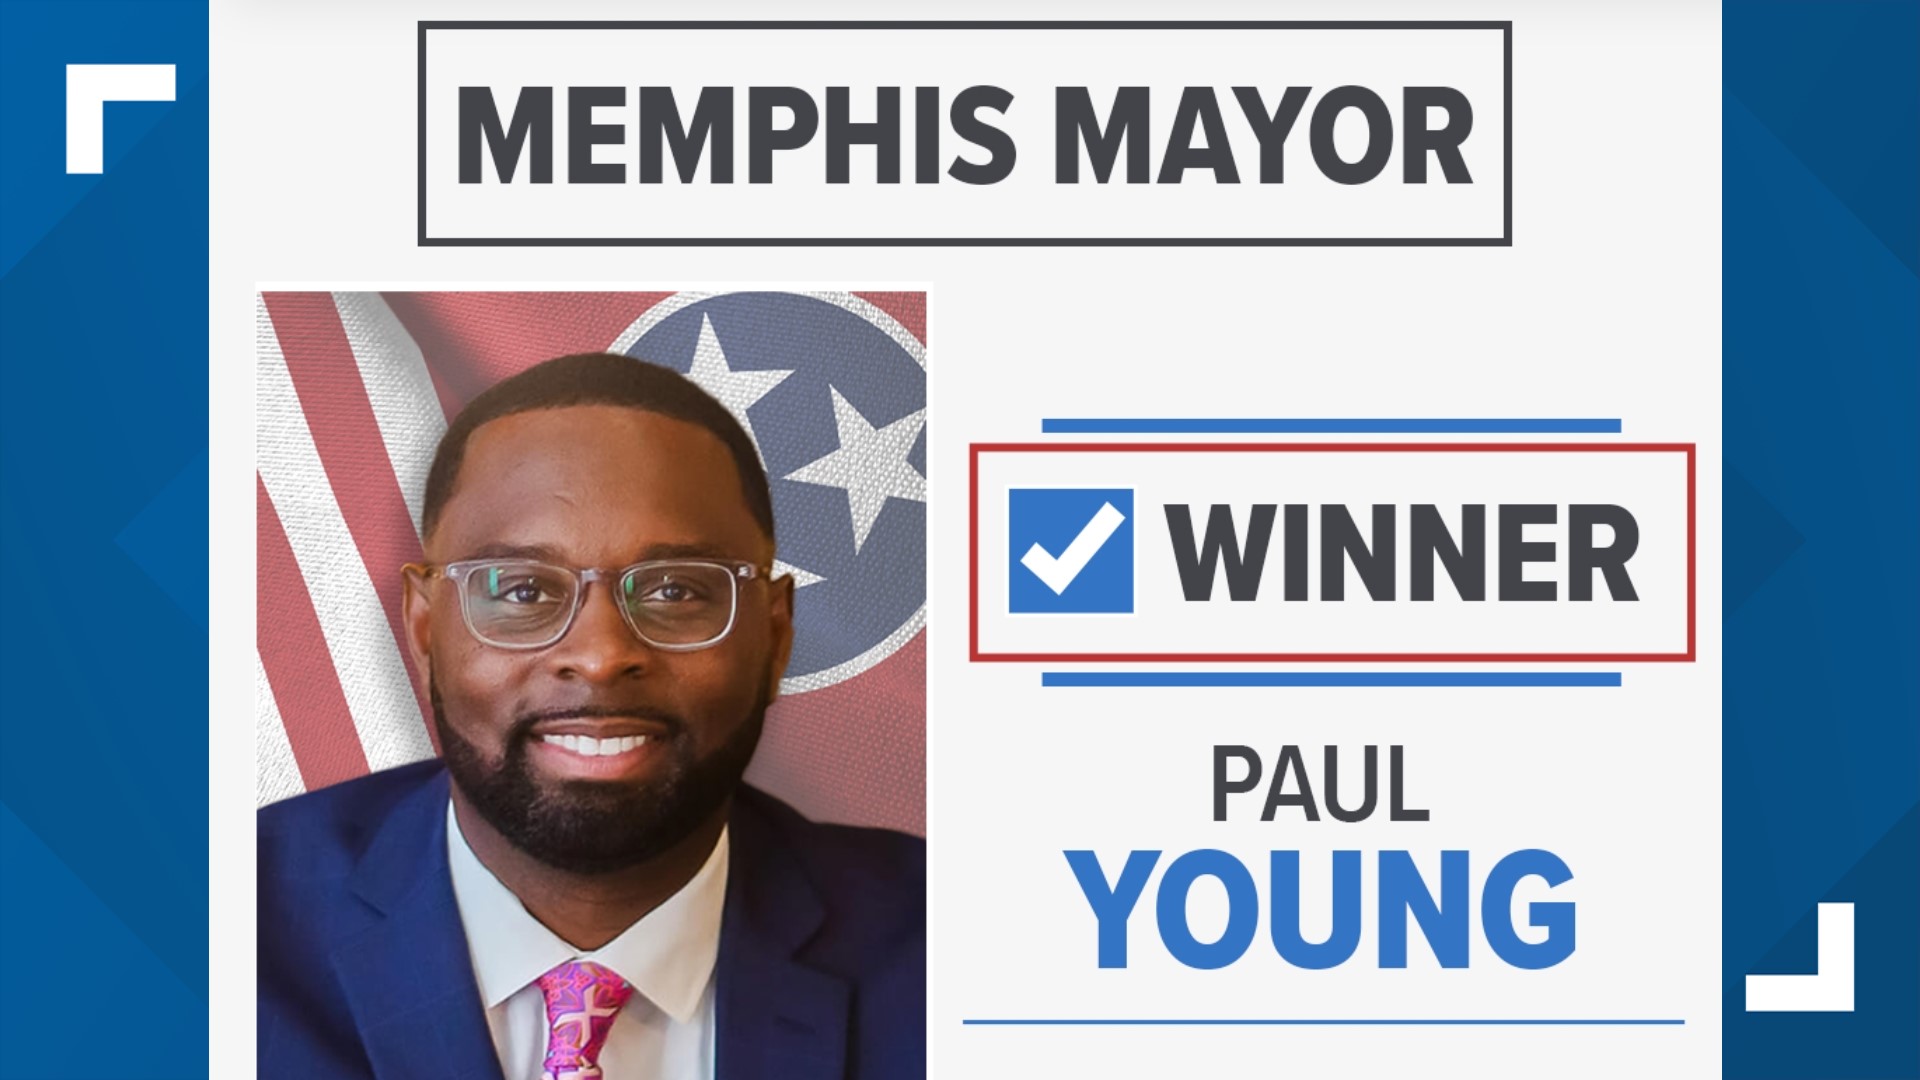 After 17 candidates ran for Mayor, Paul Young wins the office with a record-low vote total.